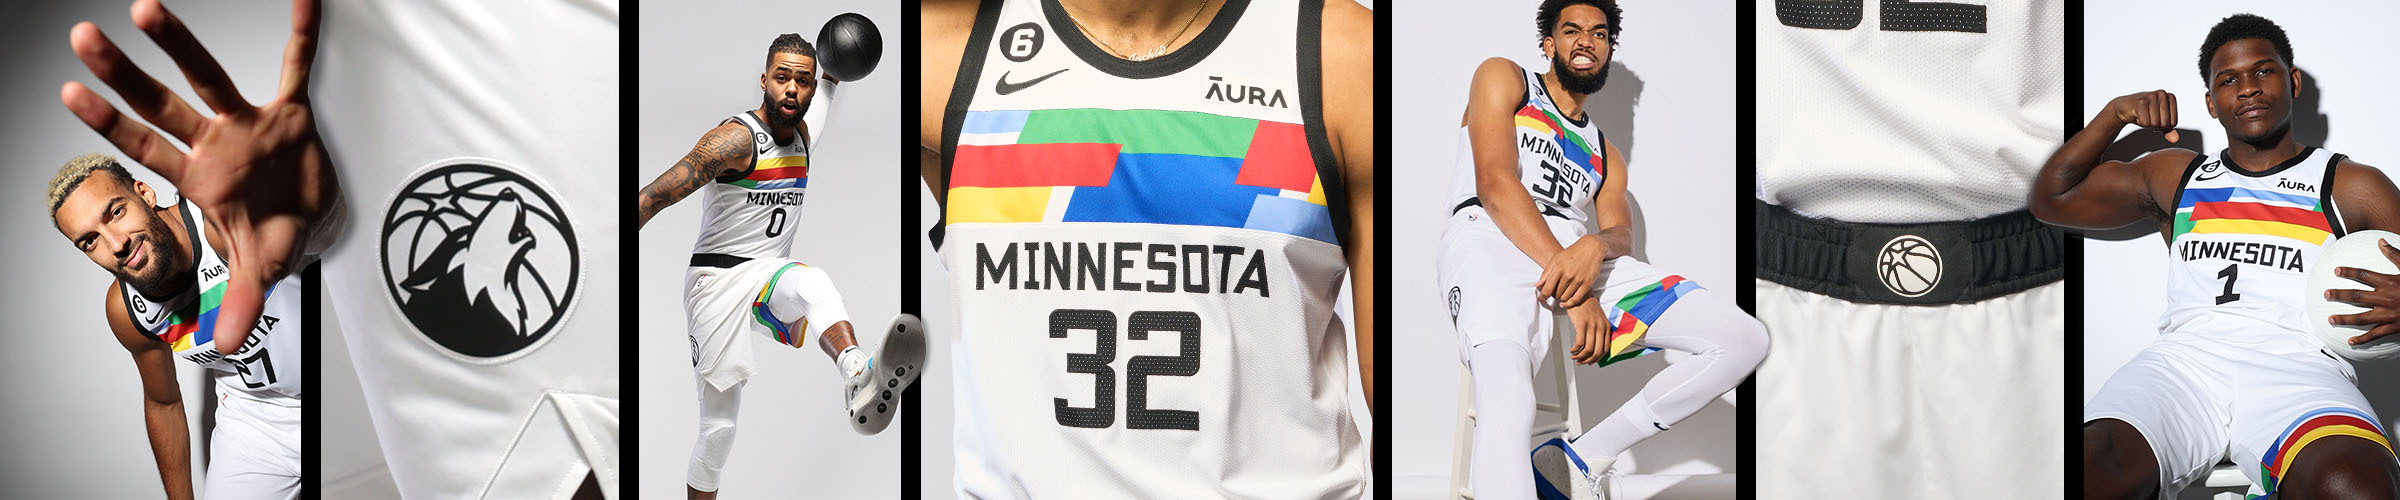 Reactions To Timberwolves City Edition Uniforms